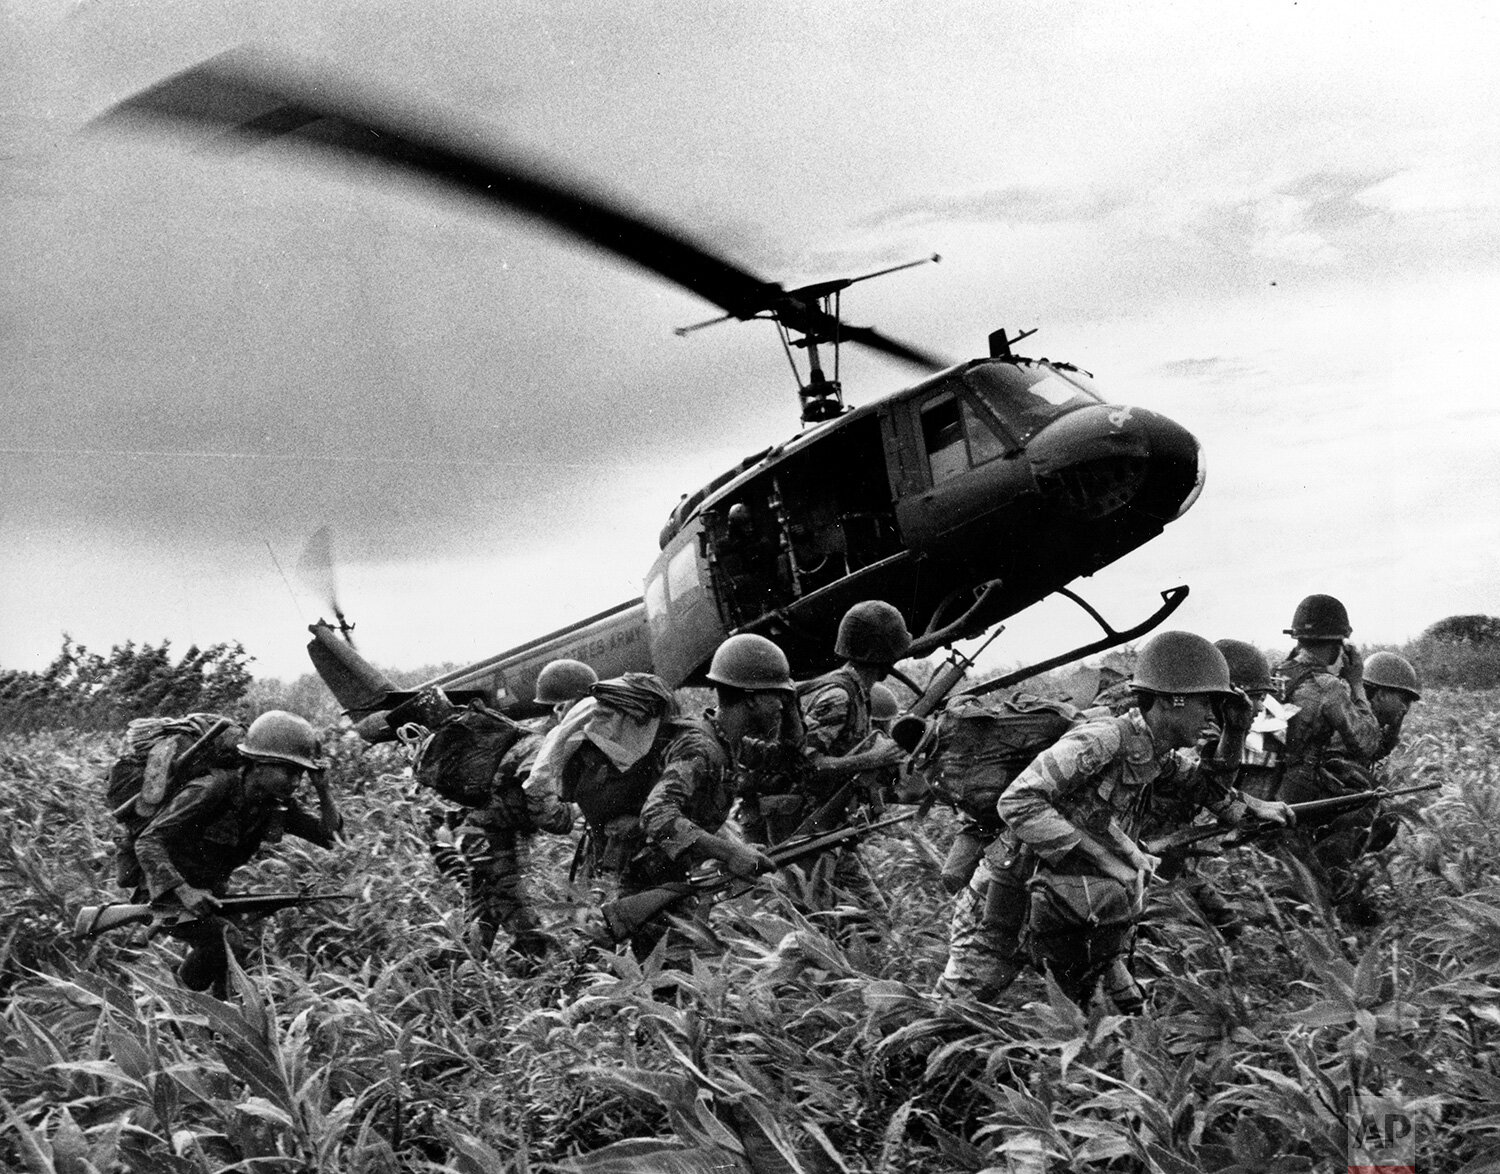  South Vietnamese Marines rush to point where descending U.S. Army helicopter will pick them up after a sweep east of the Cambodian town of Prey-Veng in June, 1970 during the Vietnam War.  The troops have been searching for a Viet Cong unit reported 